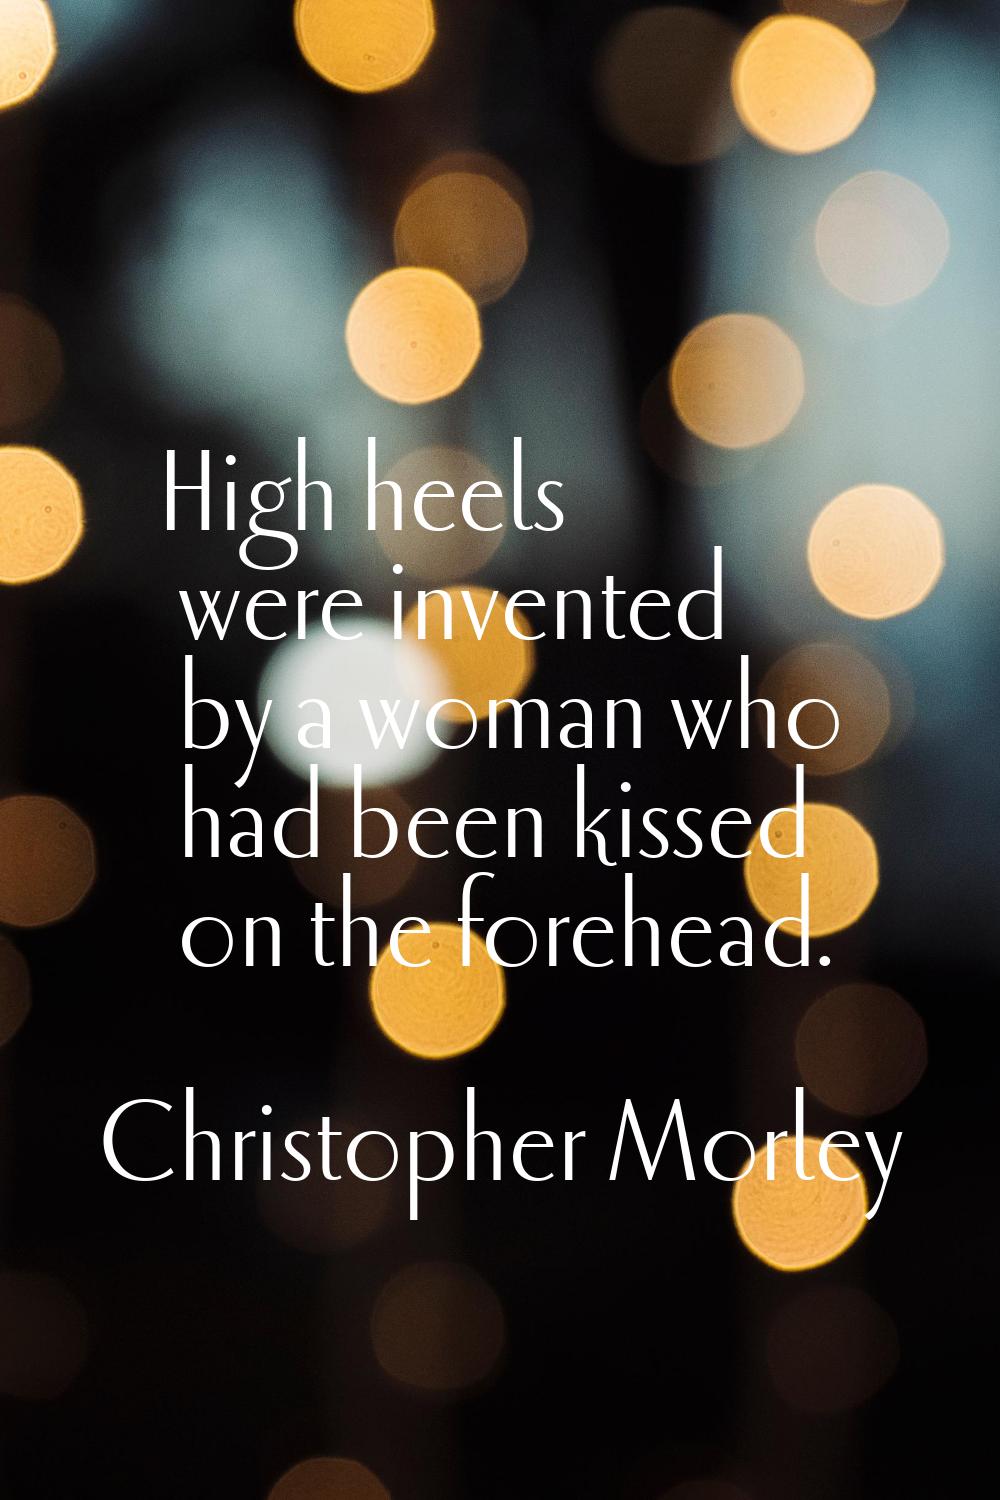 High heels were invented by a woman who had been kissed on the forehead.